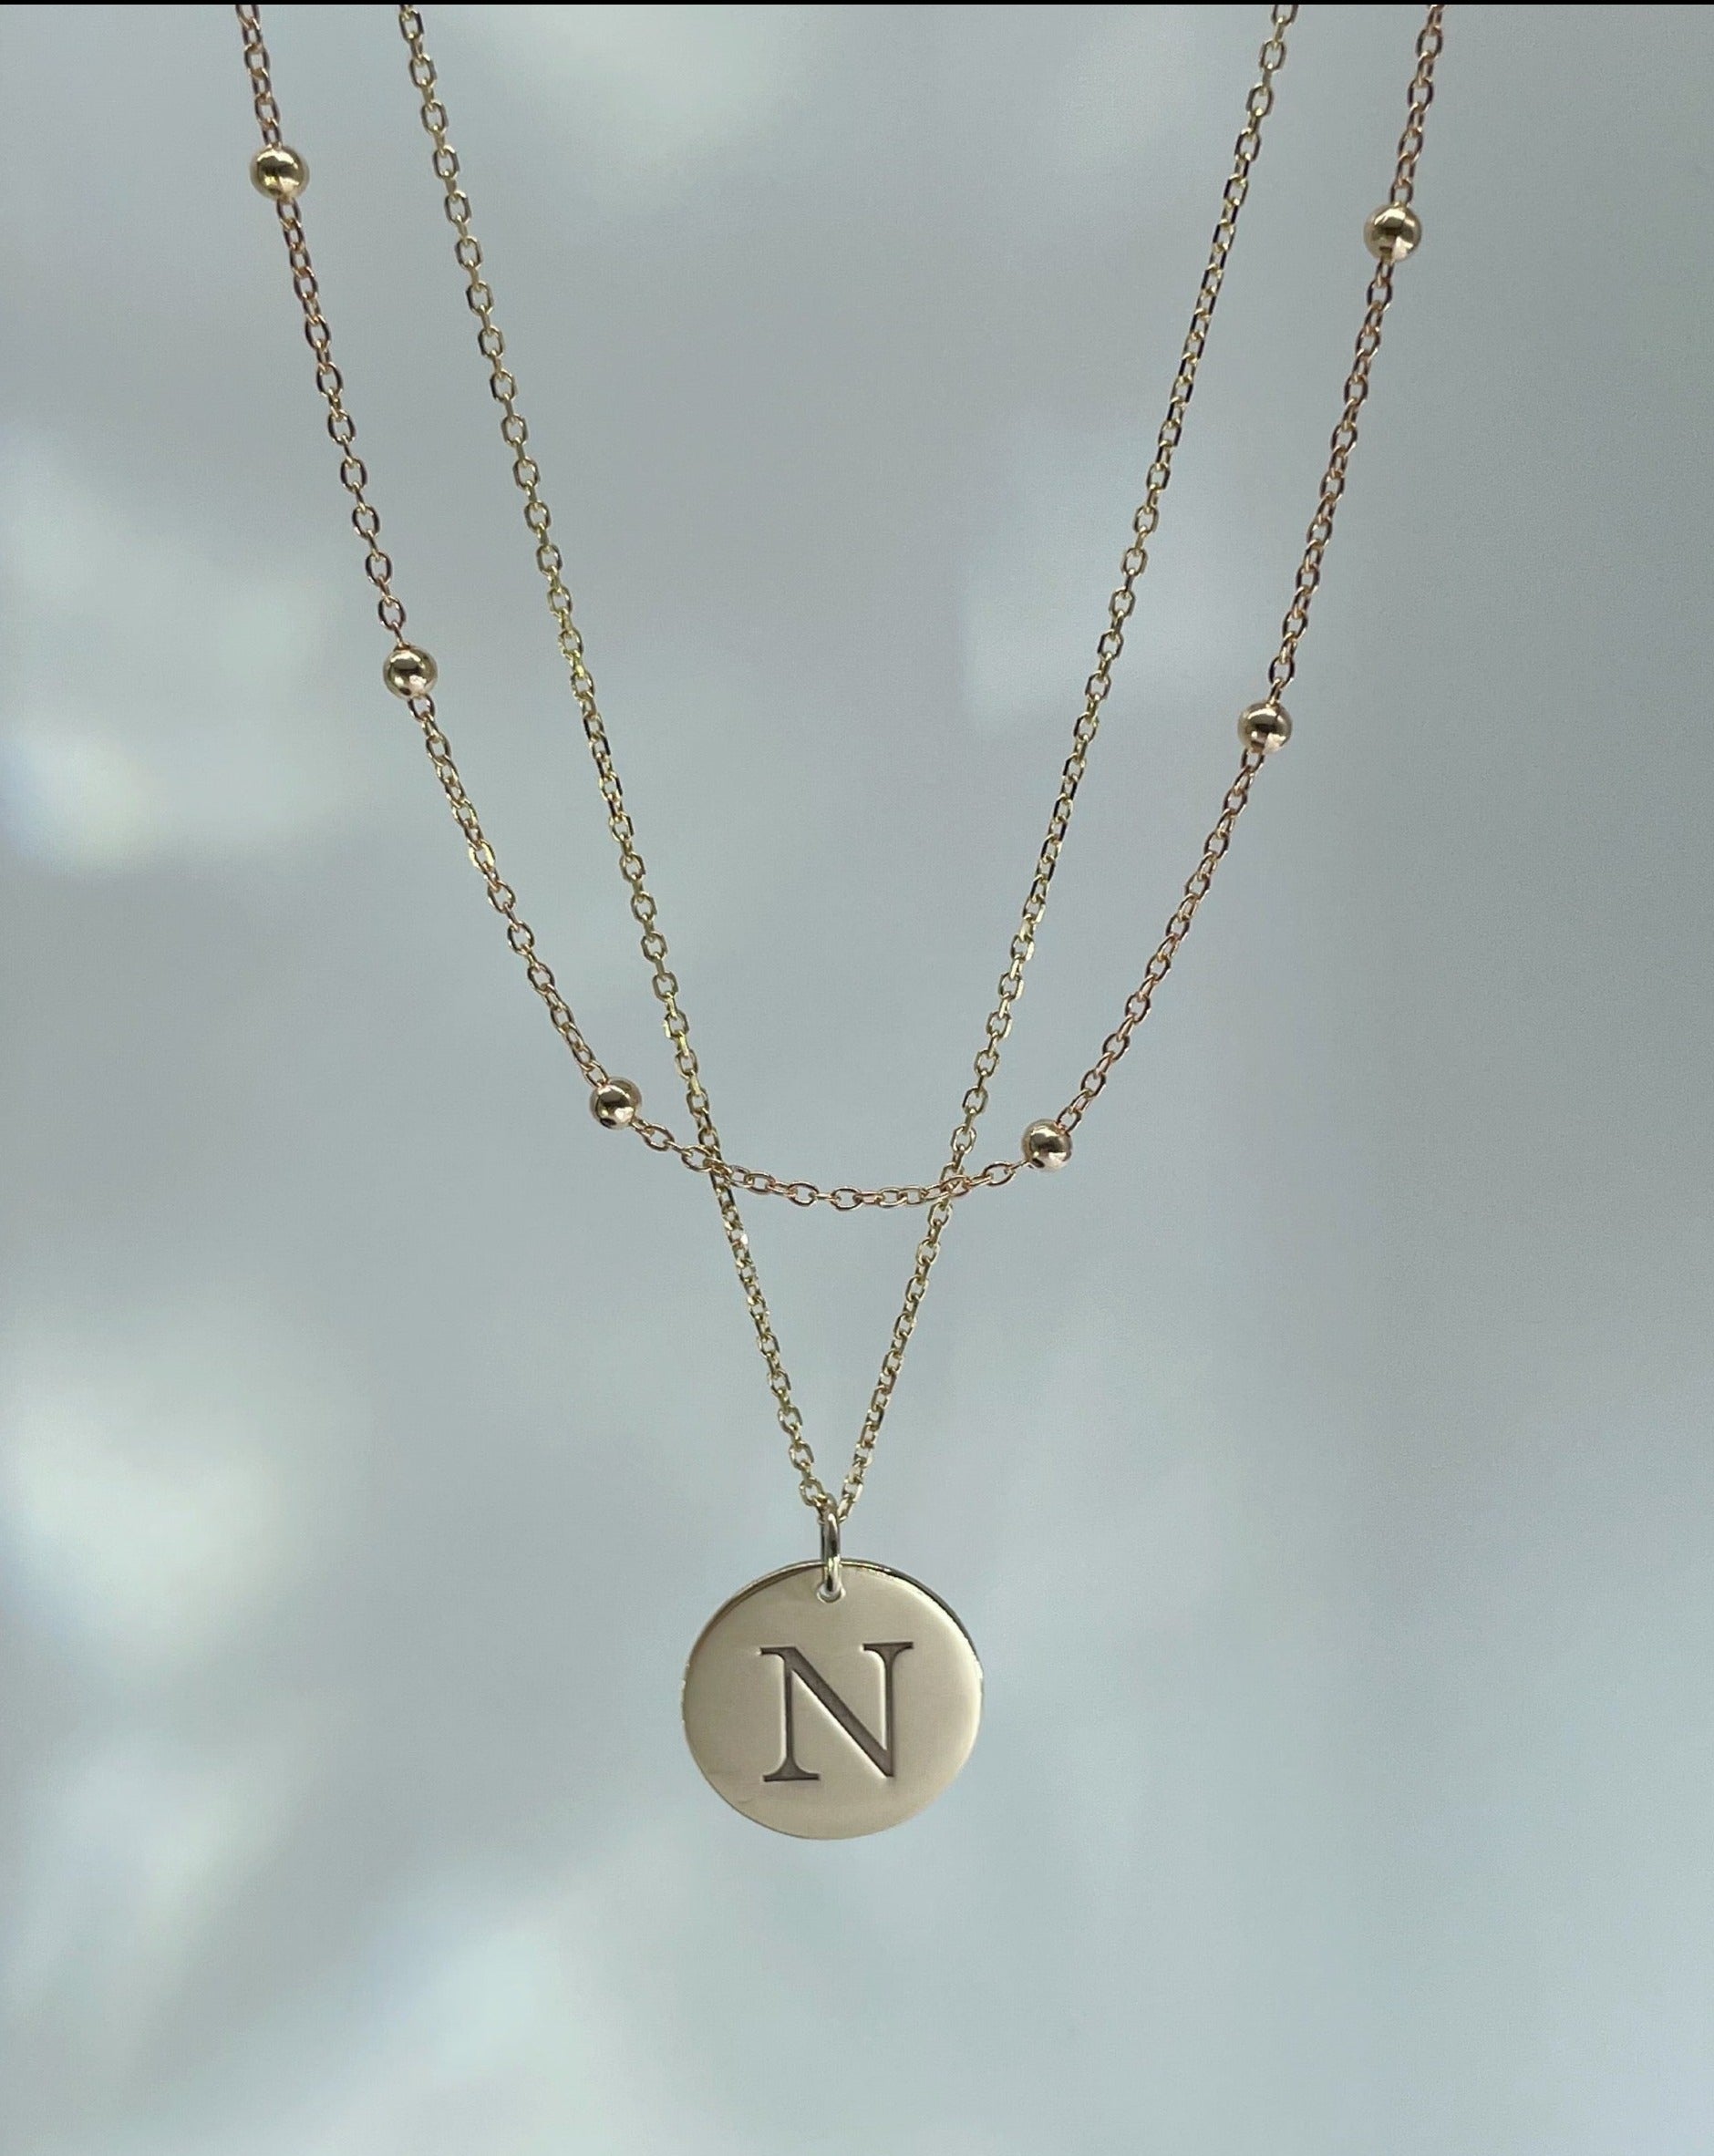 9kt Gold Initial Pendant paired with 9kt Beaded Chain from Collective & Co. Online jewellery store